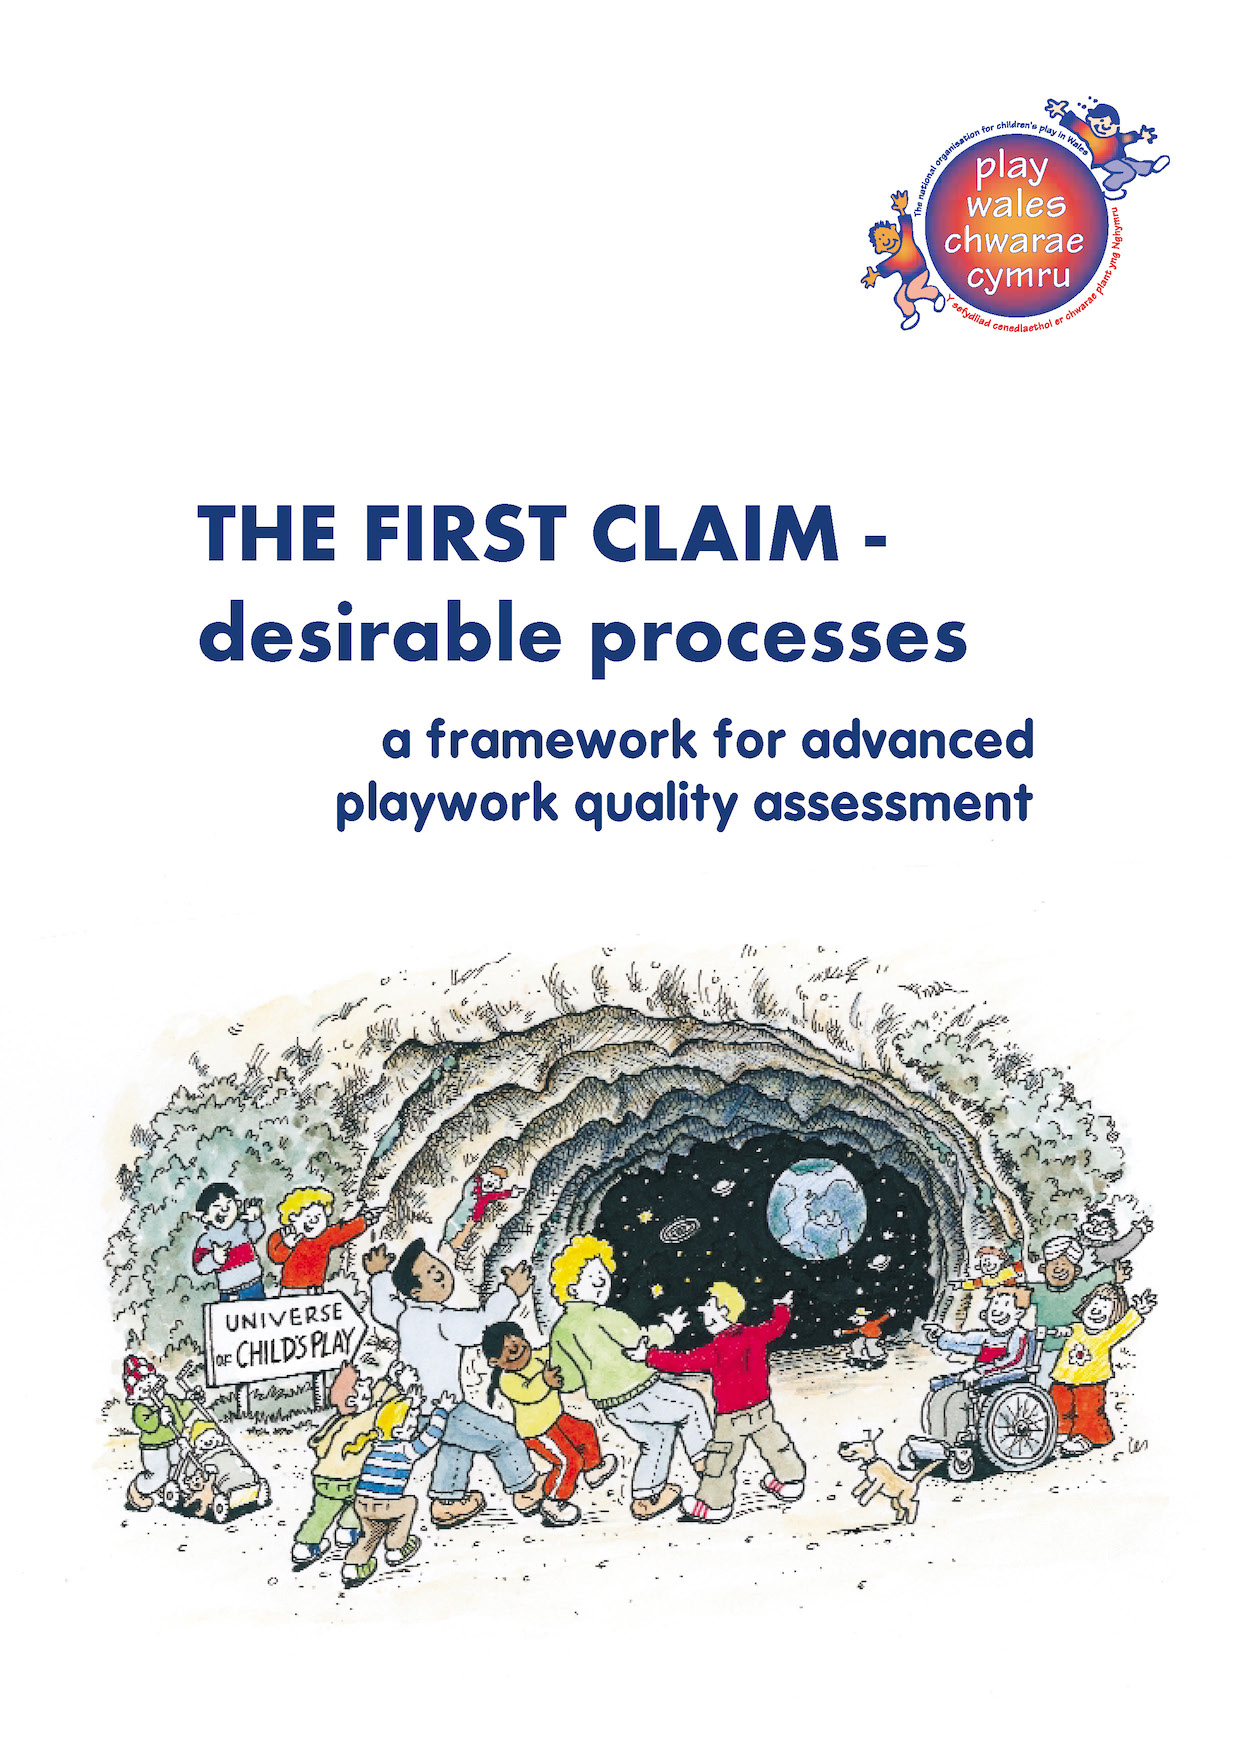 The First Claim – desirable processes